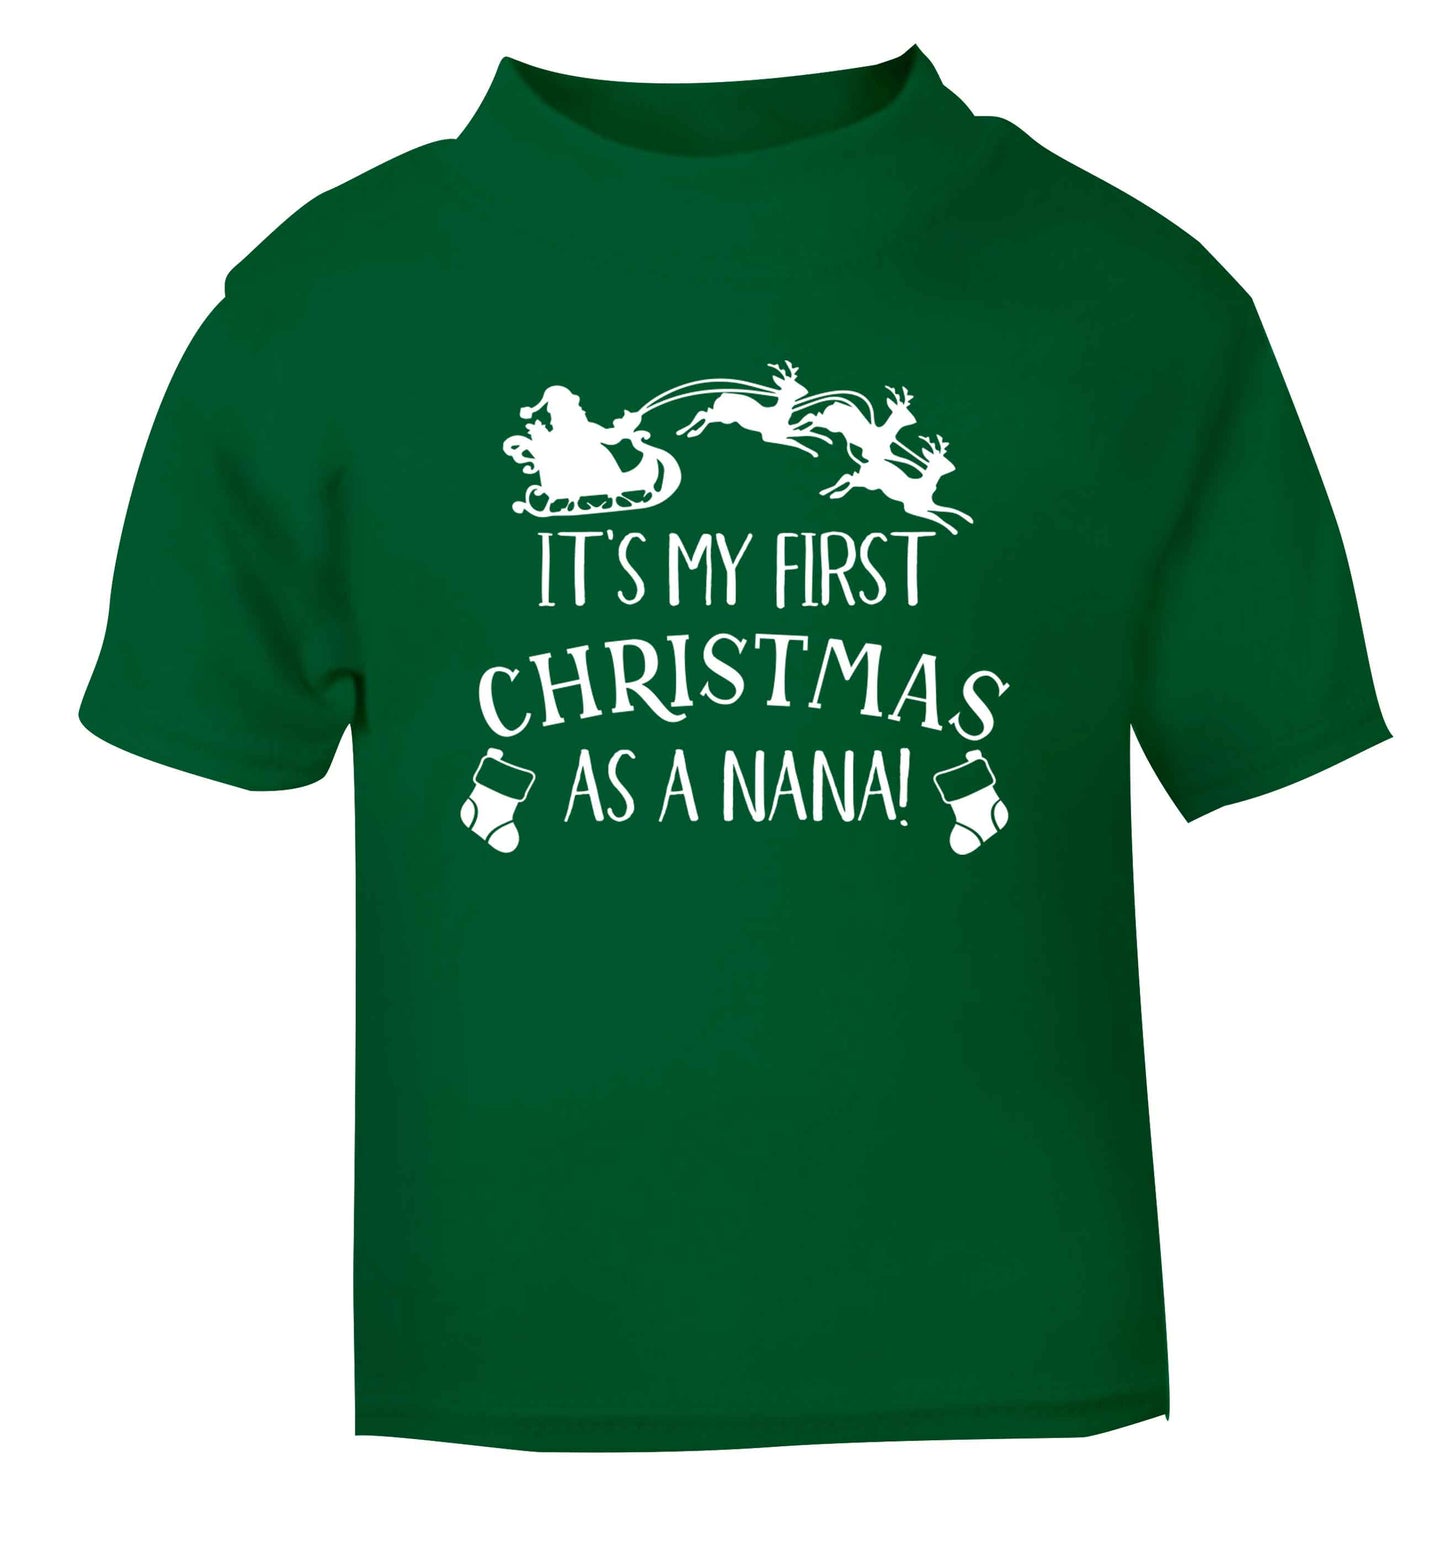 It's my first Christmas as a nana green Baby Toddler Tshirt 2 Years